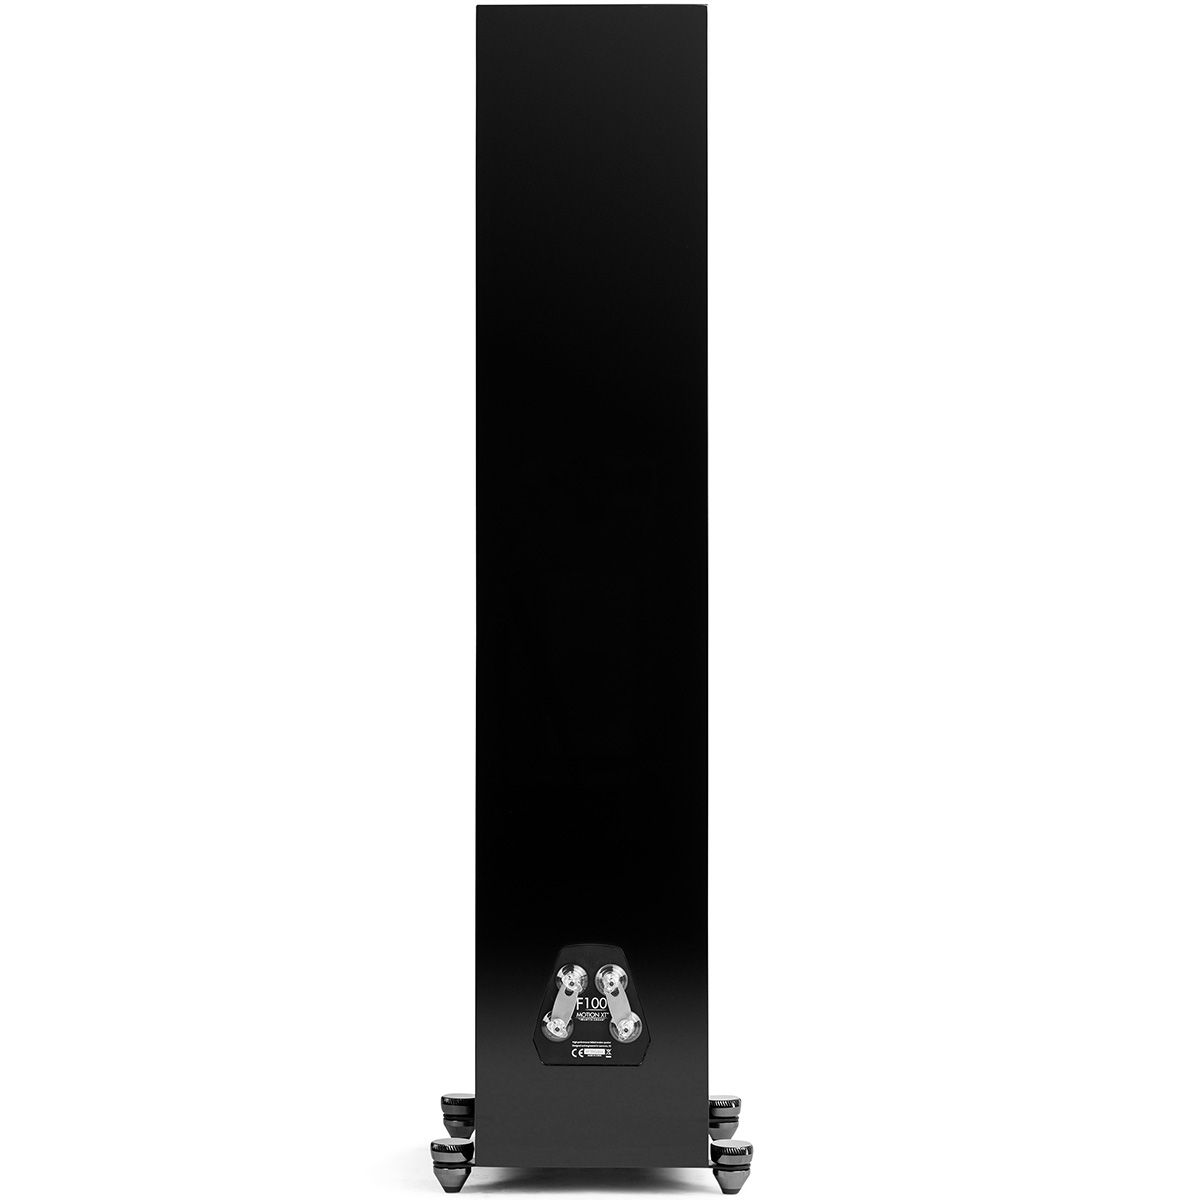 MartinLogan Motion XT F100  Floorstanding Speaker in black, rear view with grilles on white background